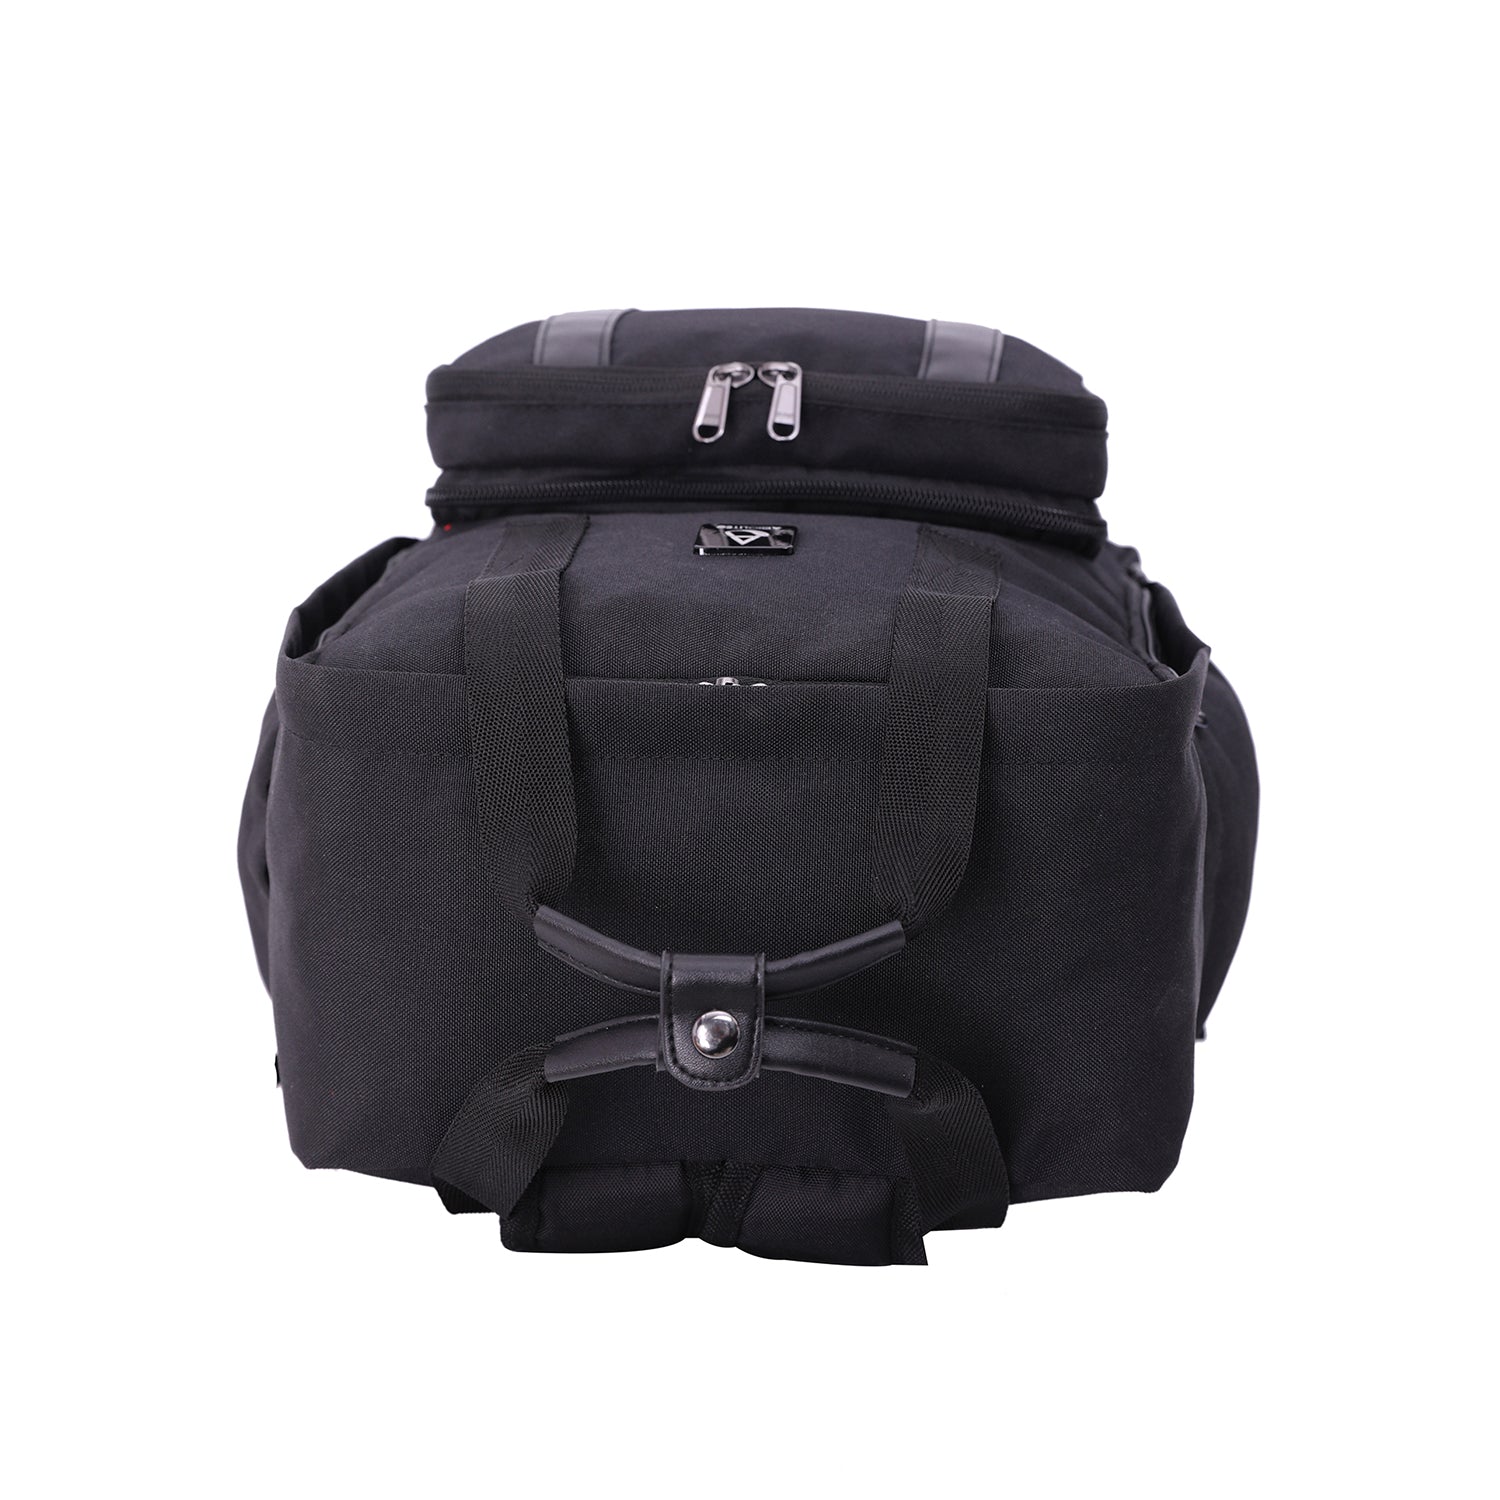 Aerolite 40x20x25 Ryanair Maximum Size Backpack With Removable Small Carry Pouch Eco-Friendly Shower-Resistant Cabin Luggage Approved Travel Carry On Holdall Flight Rucksack with 10 Year Warranty